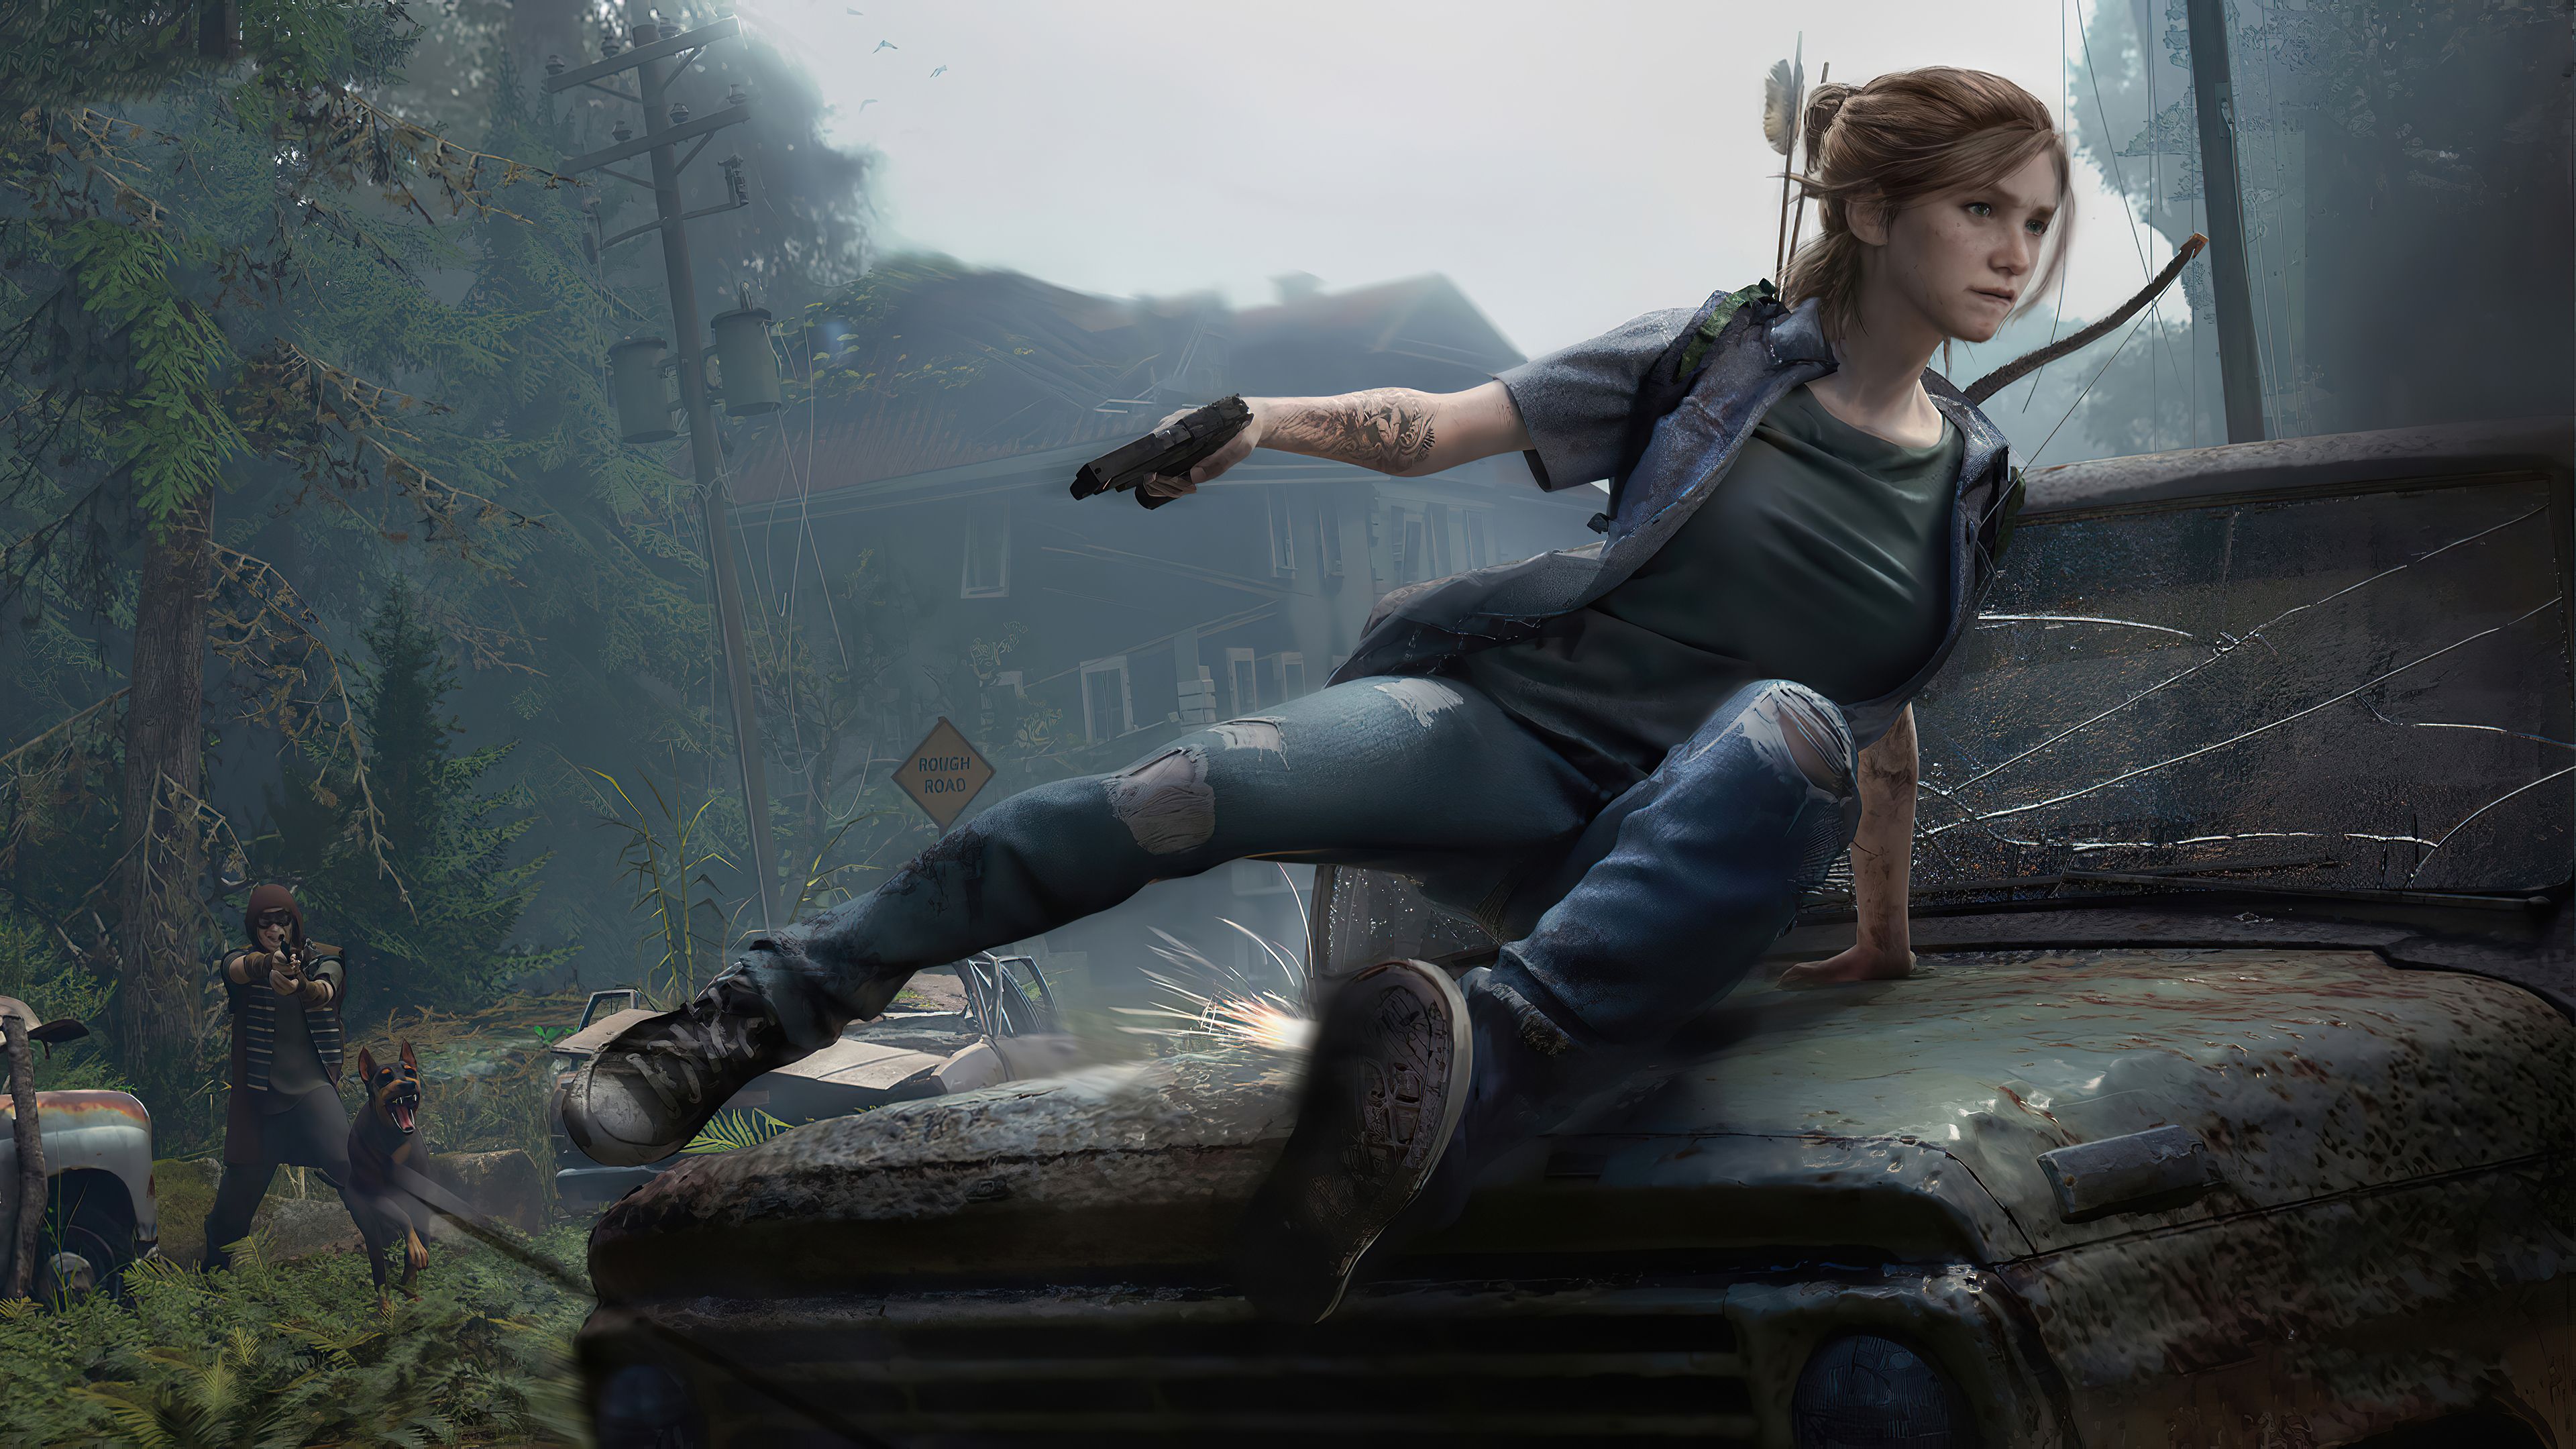 New Ellie The Last of Us 2 Wallpaper, HD Games 4K Wallpaper, Image, Photo and Background